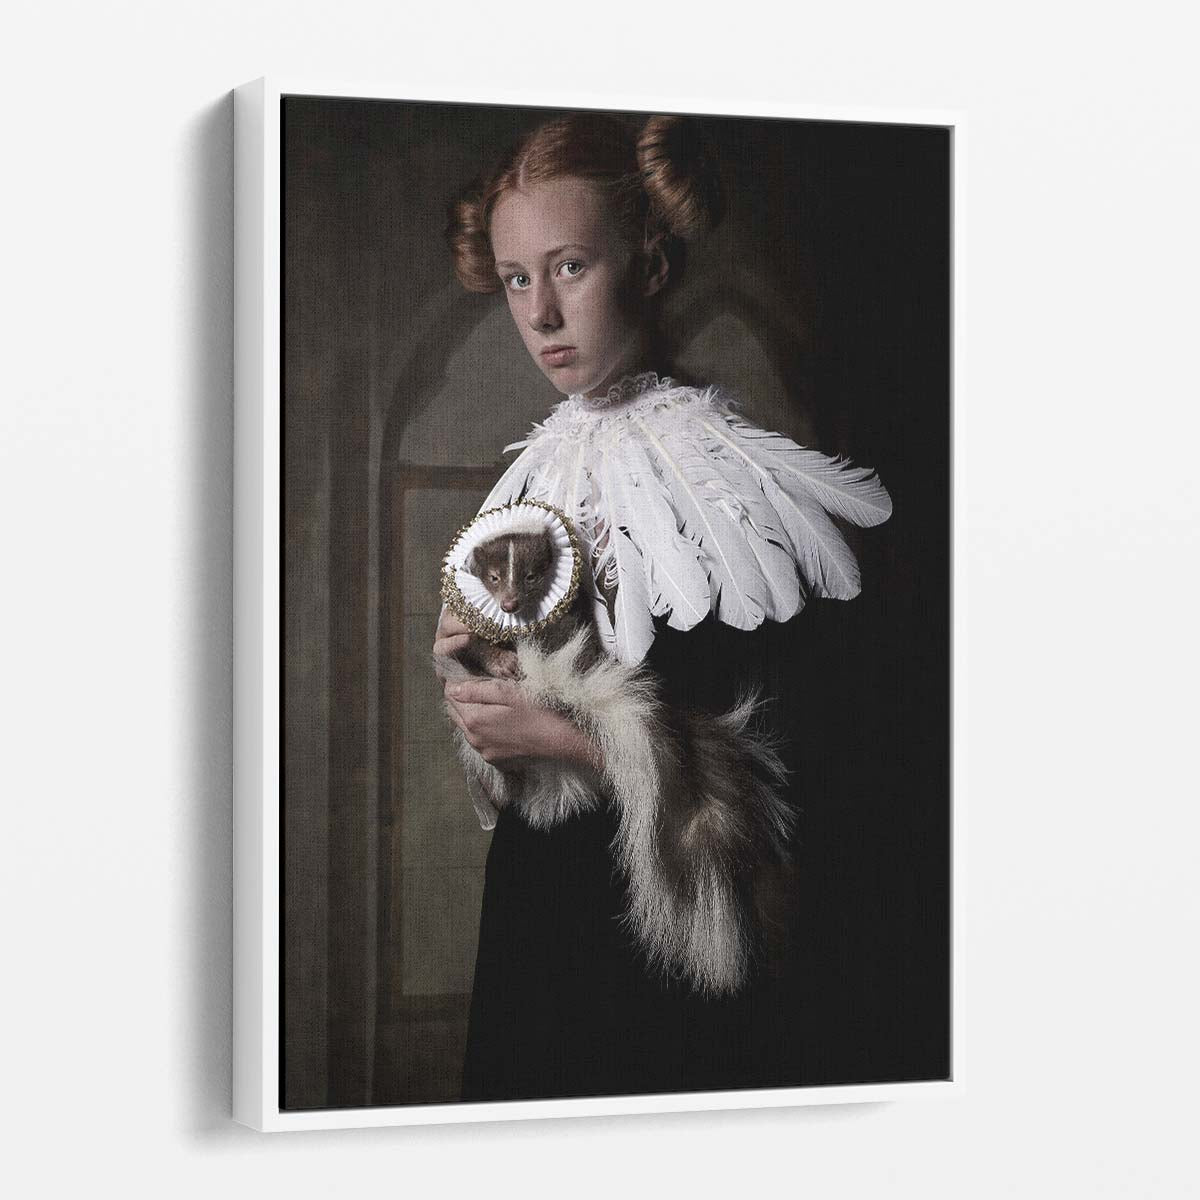 Vintage Dutch Girl Portrait with Skunk, Feathered Collar Photography Art by Luxuriance Designs, made in USA